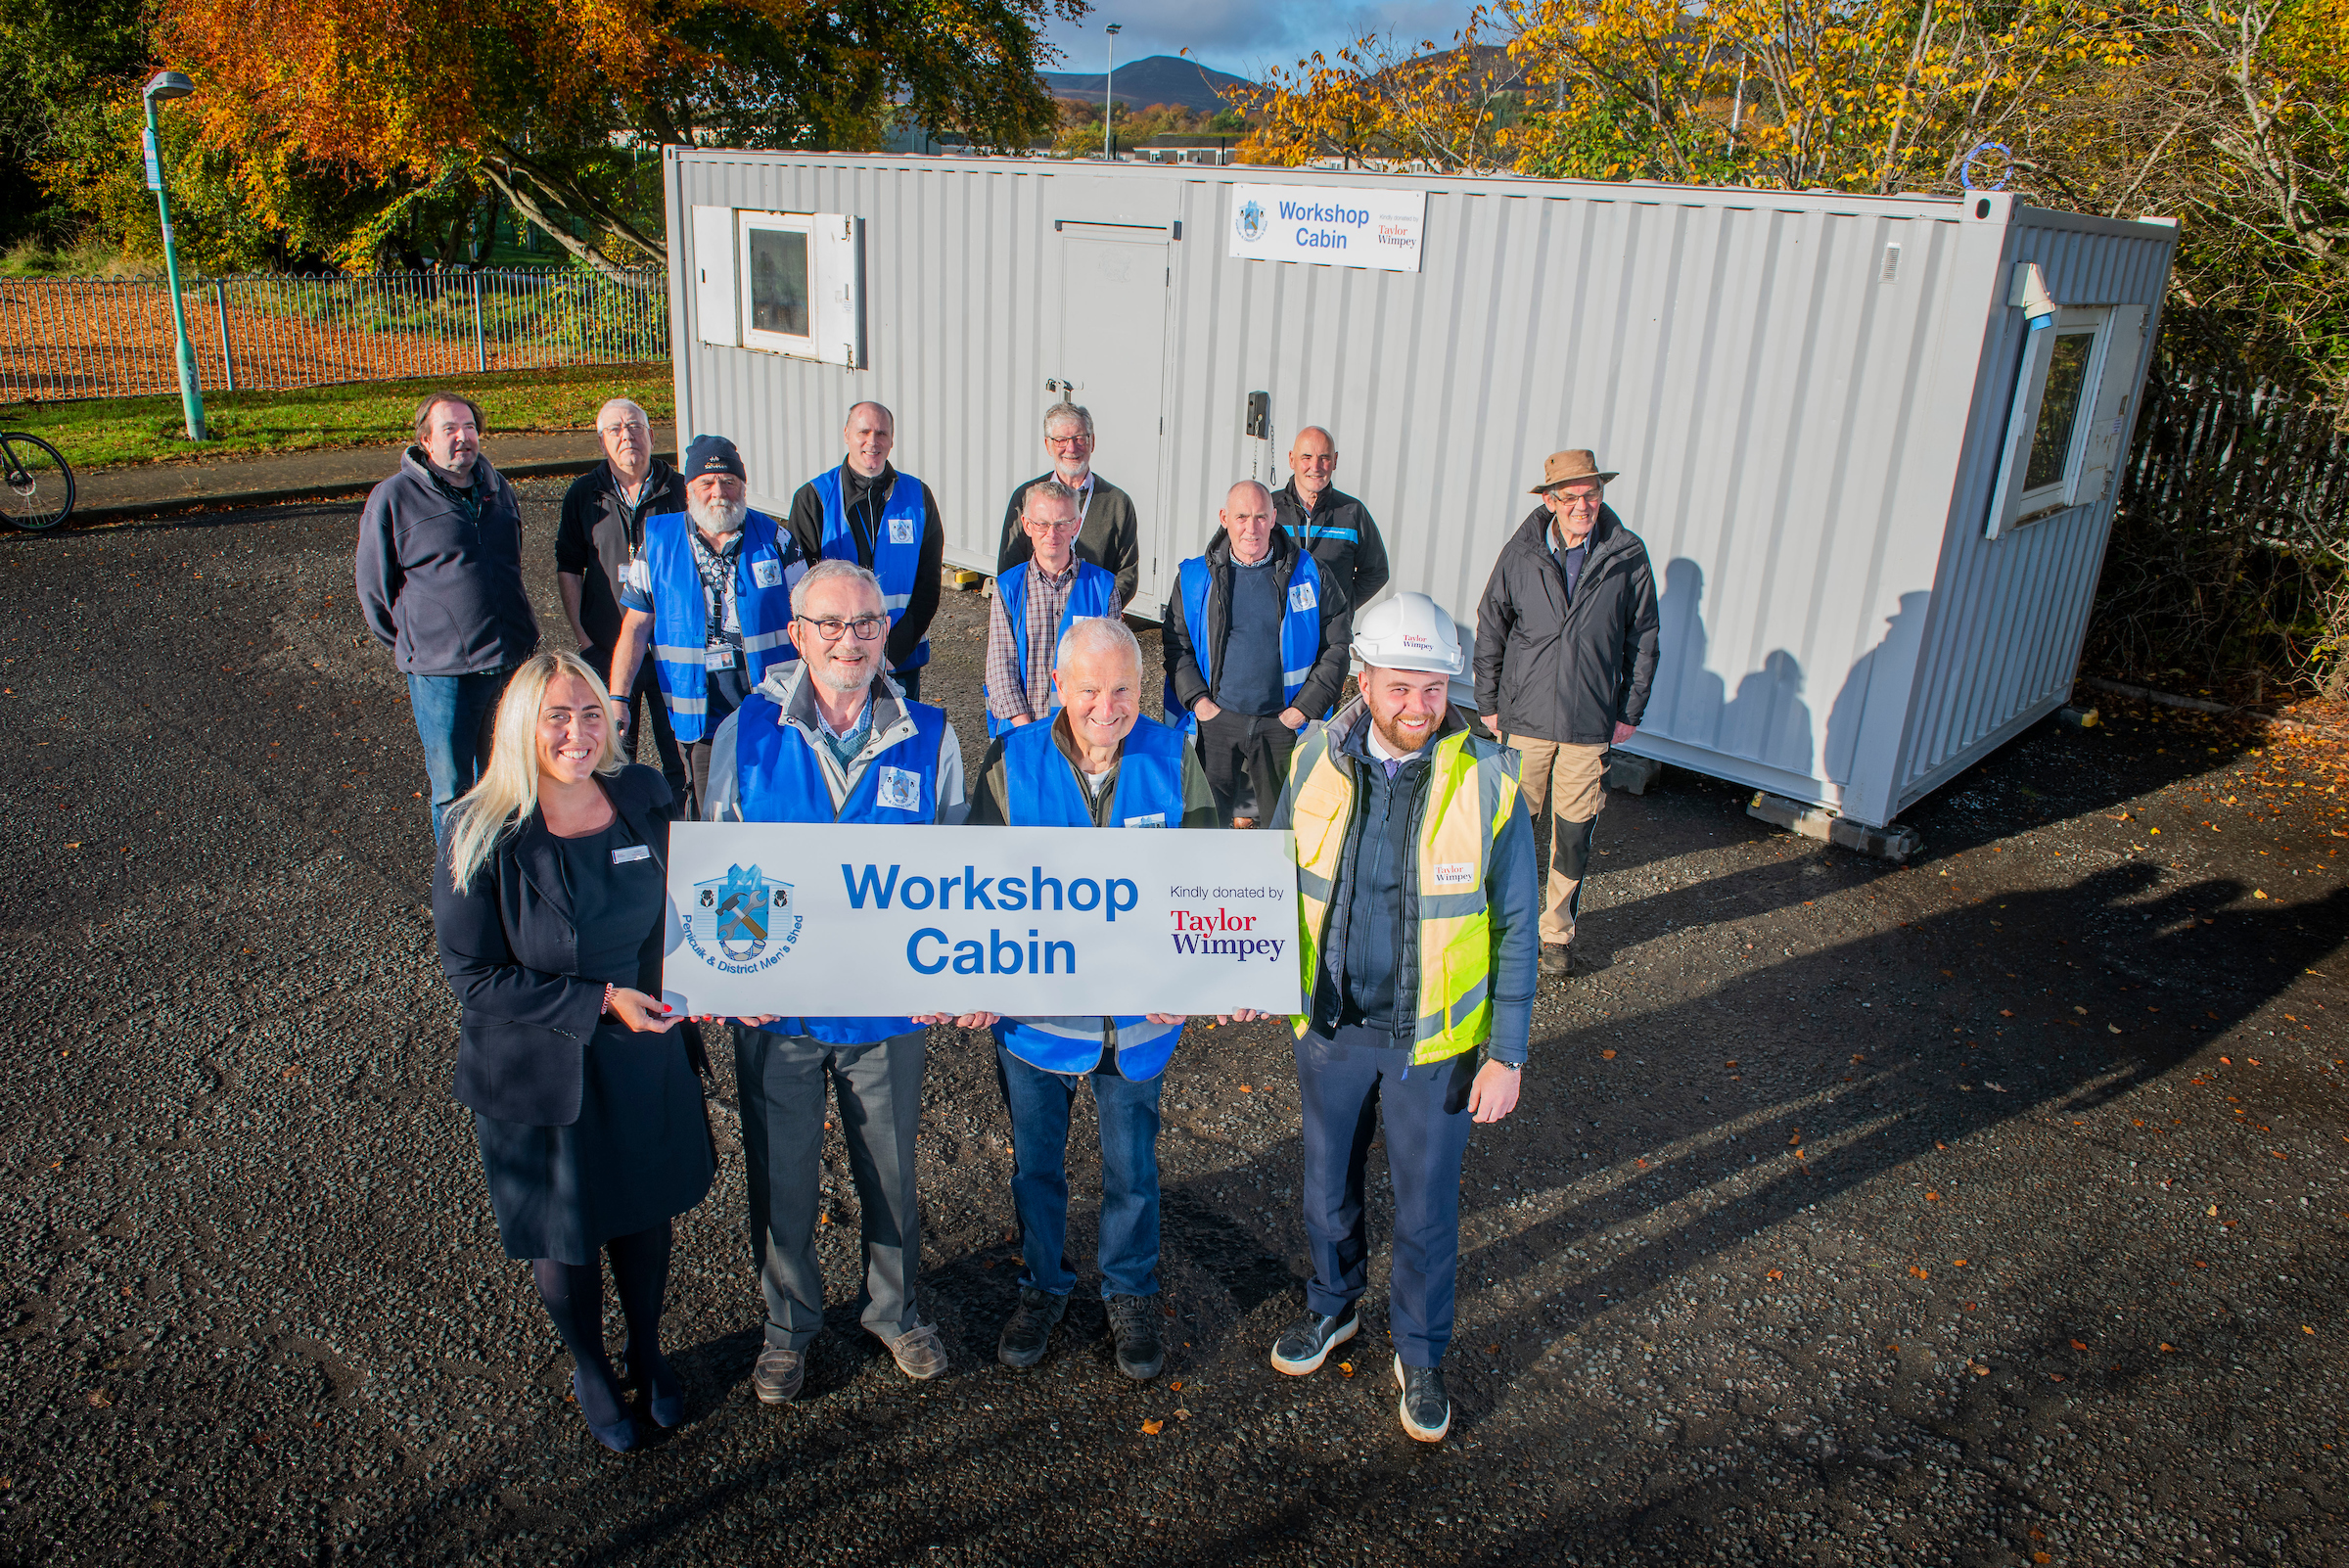 Unusual donation from Taylor Wimpey creates work cabin for Men's Shed in Penicuik